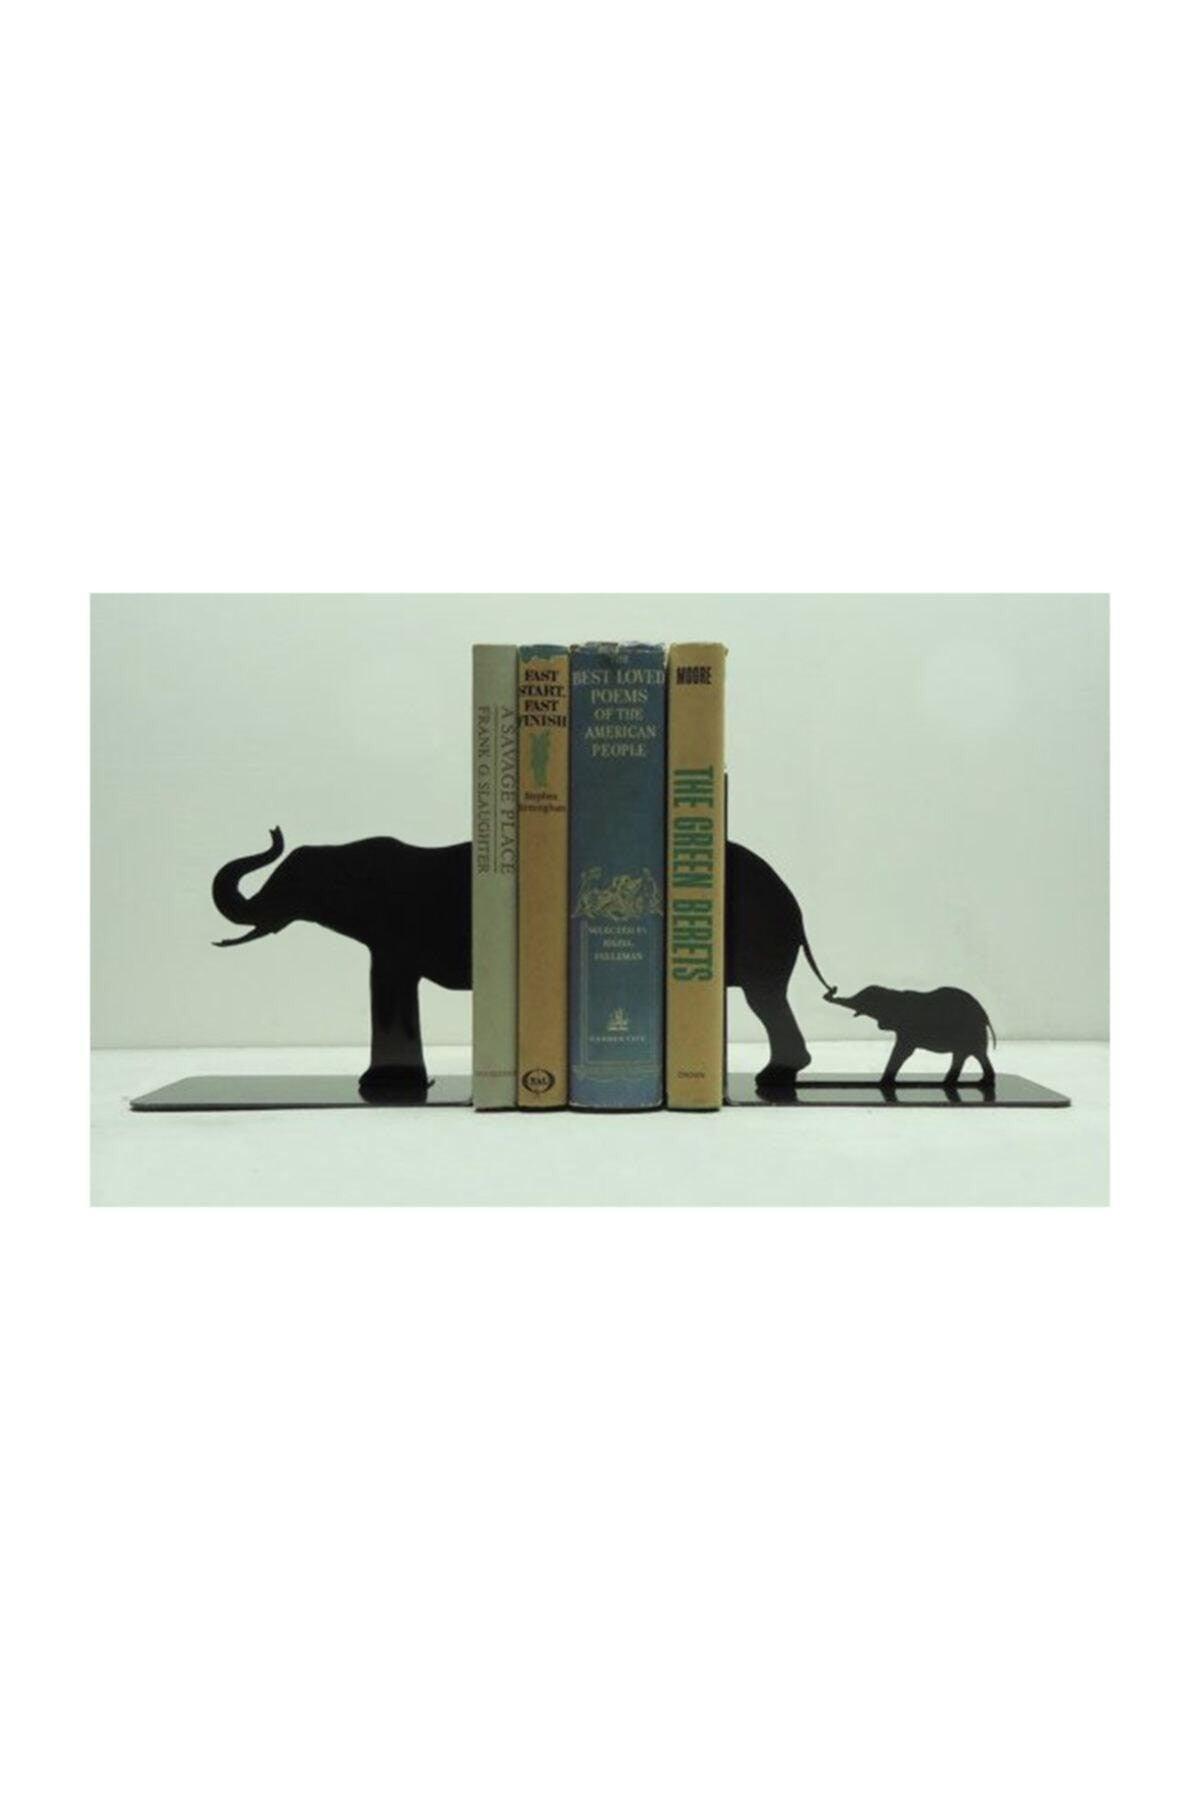 Decorative Metal Book Holder With Elephant Figure , Book Support Decorative Metal Bookcase - Swordslife